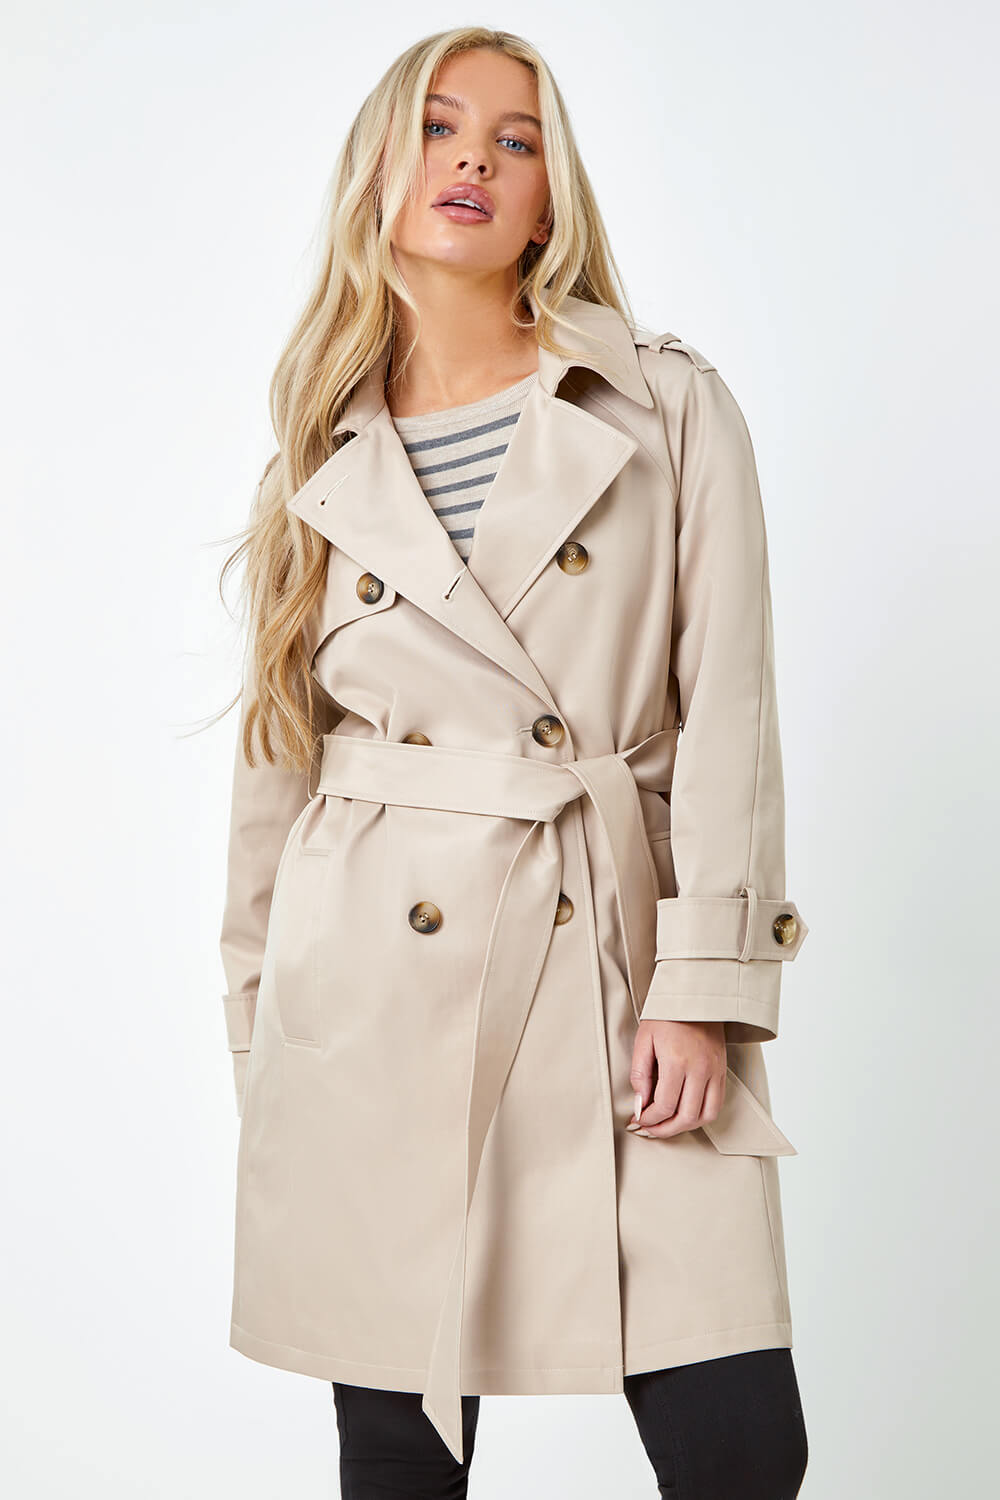 Stone Petite Double Breasted Trench Coat, Image 4 of 6